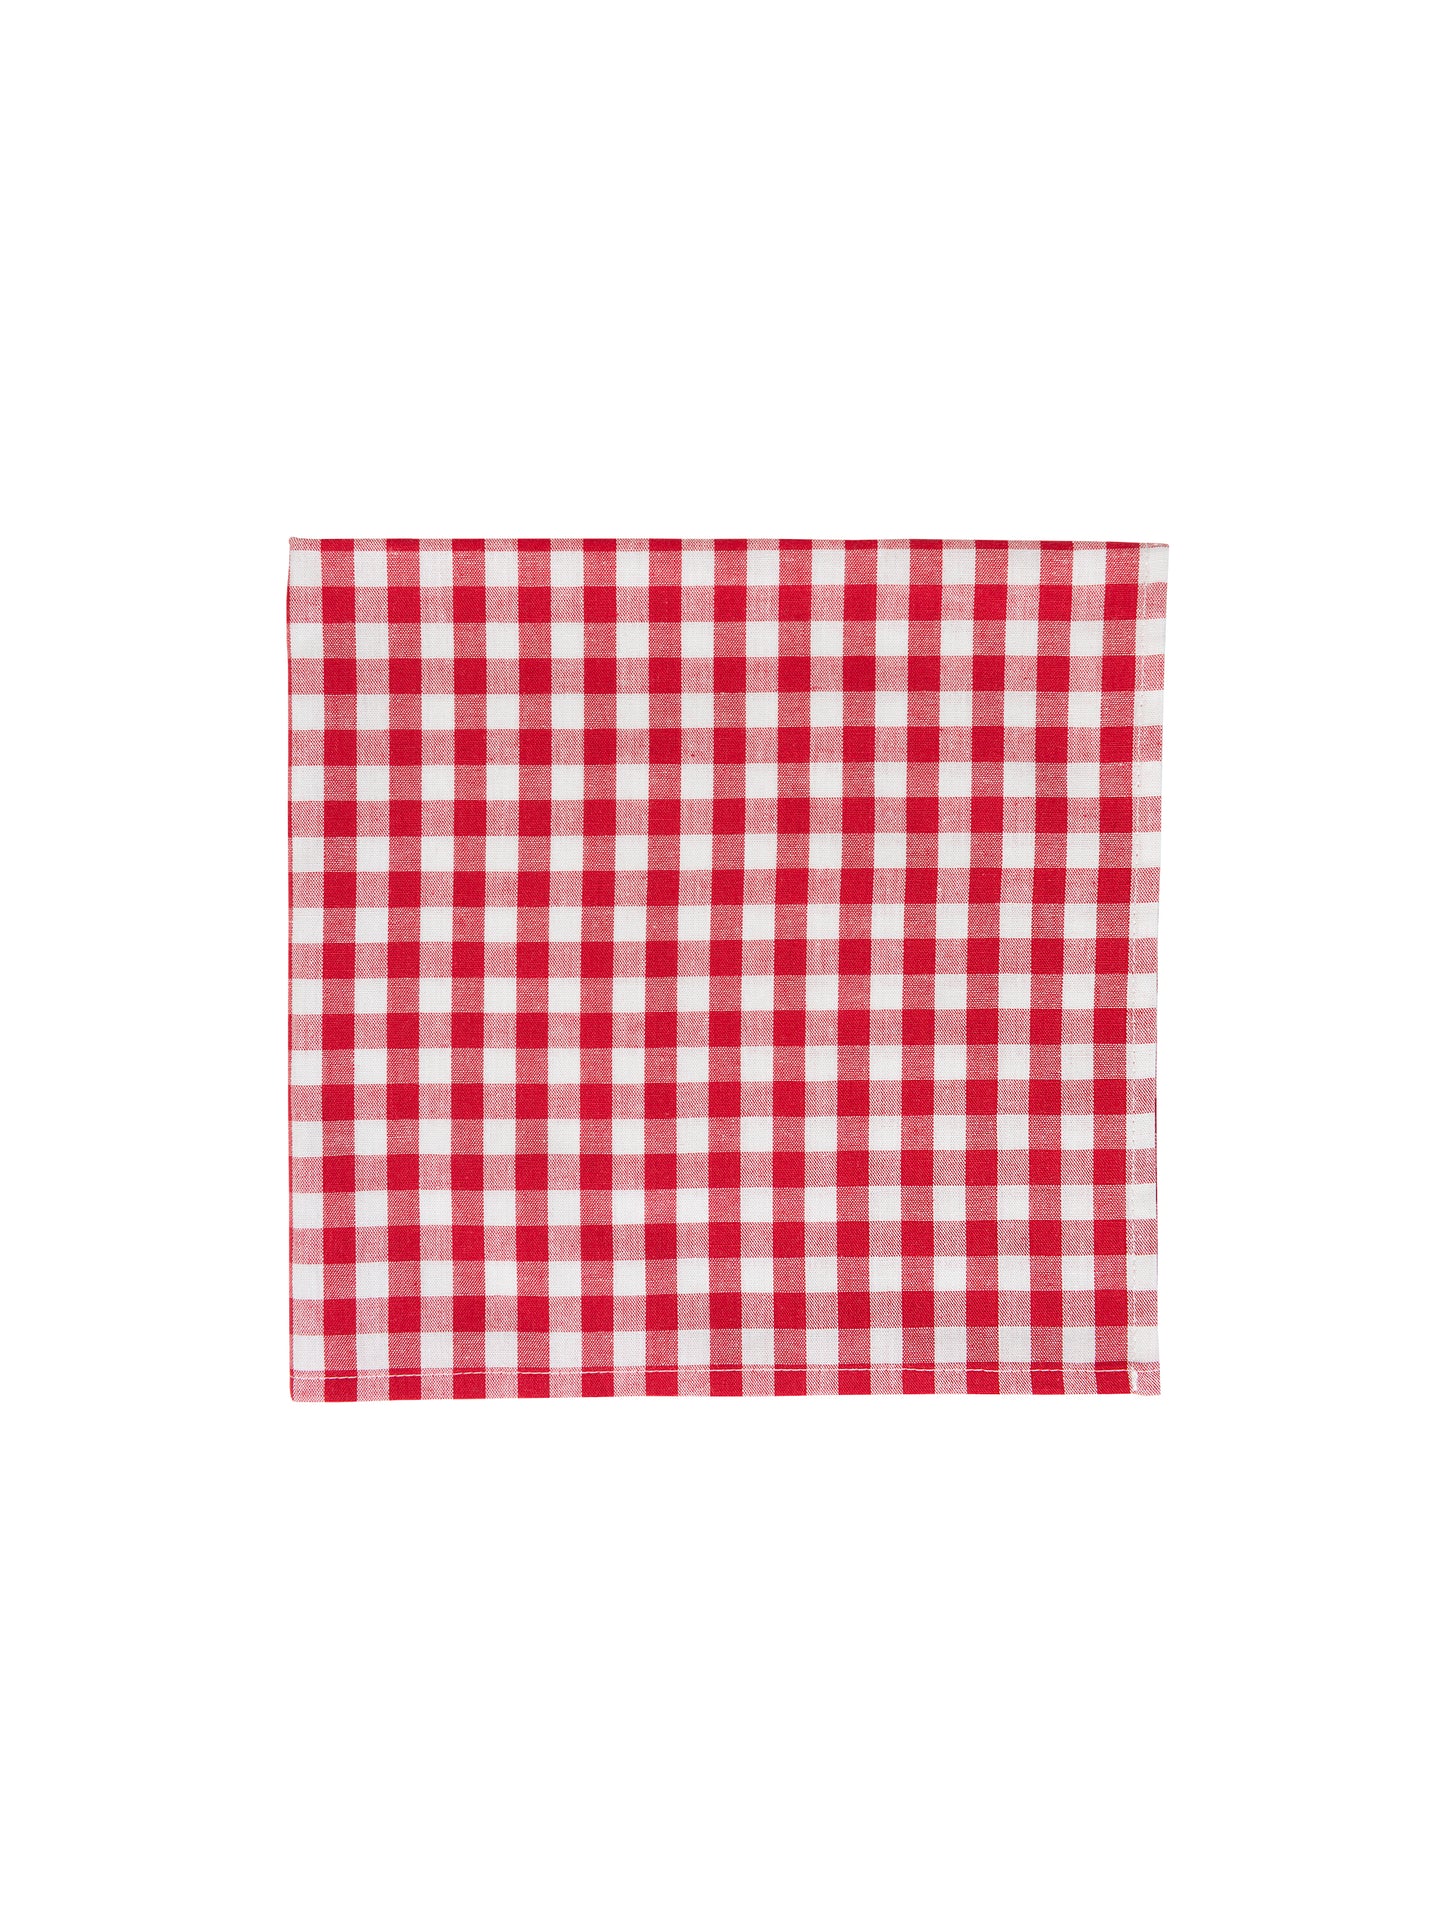 WT Red Gingham Linen Collection Napkins 13 Inch Square Weston Table